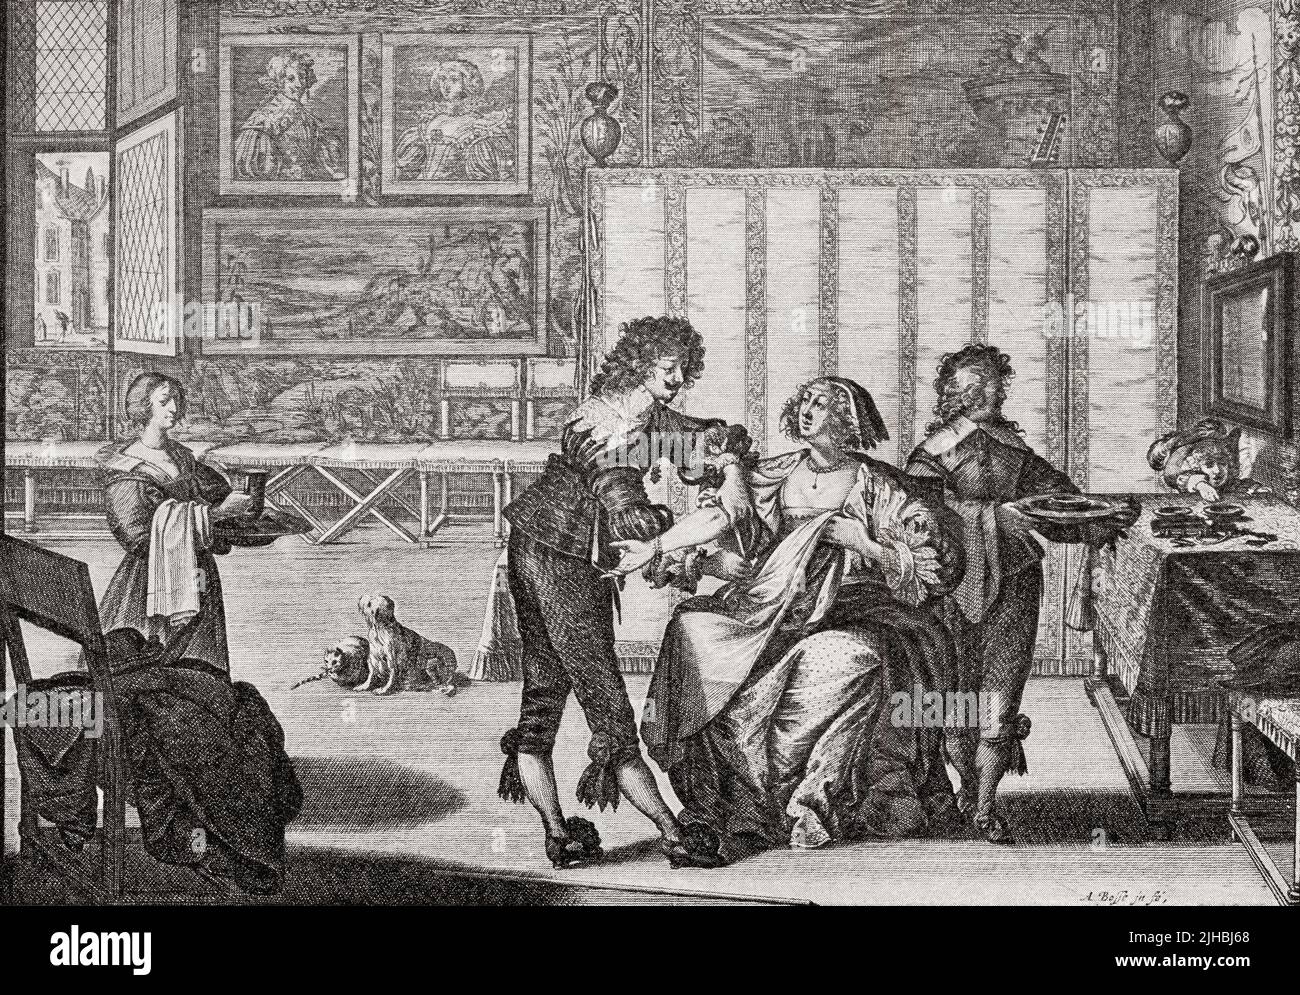 Bloodletting, after the 17th century work by Abraham Bosse.  Bloodletting or blood-letting the withdrawal of blood from a patient to prevent or cure illness and disease.  From Modes and Manners, published 1935. Stock Photo